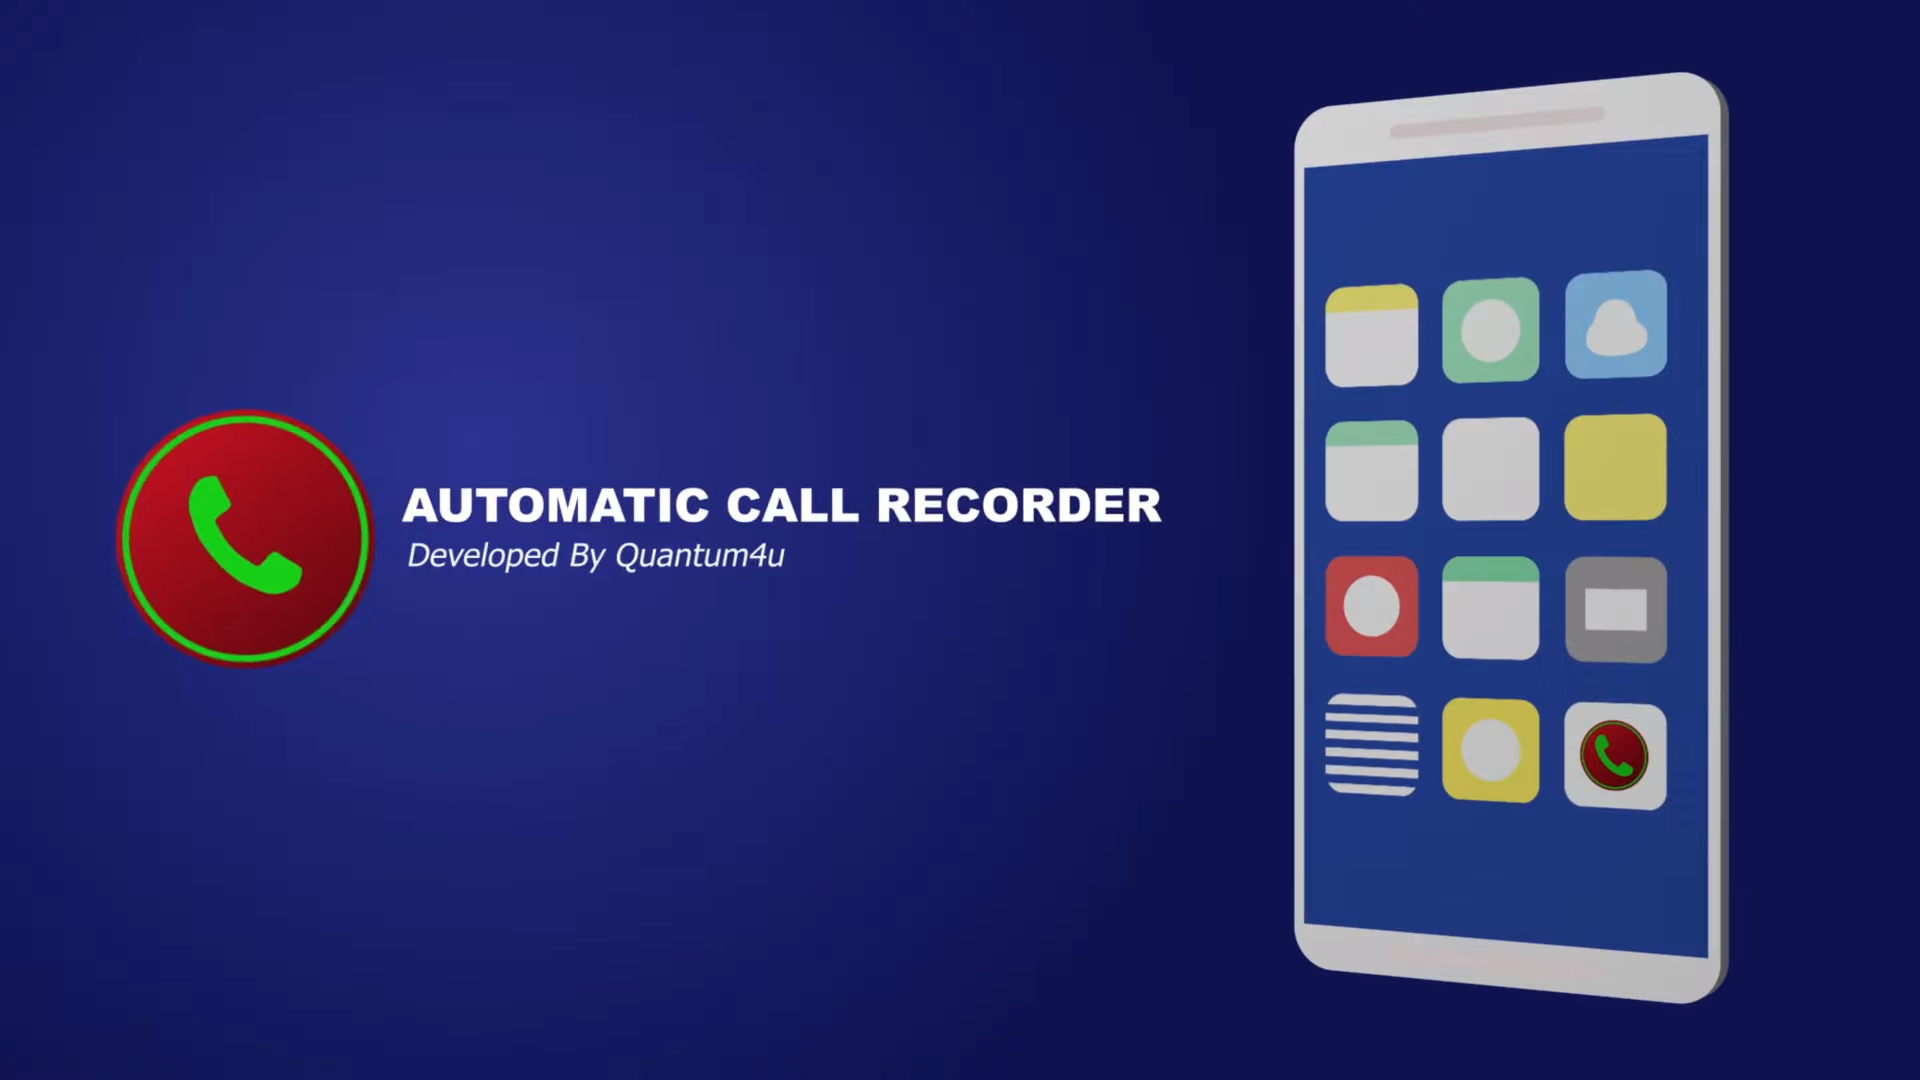 Feathers Of Auto Call Recorder App